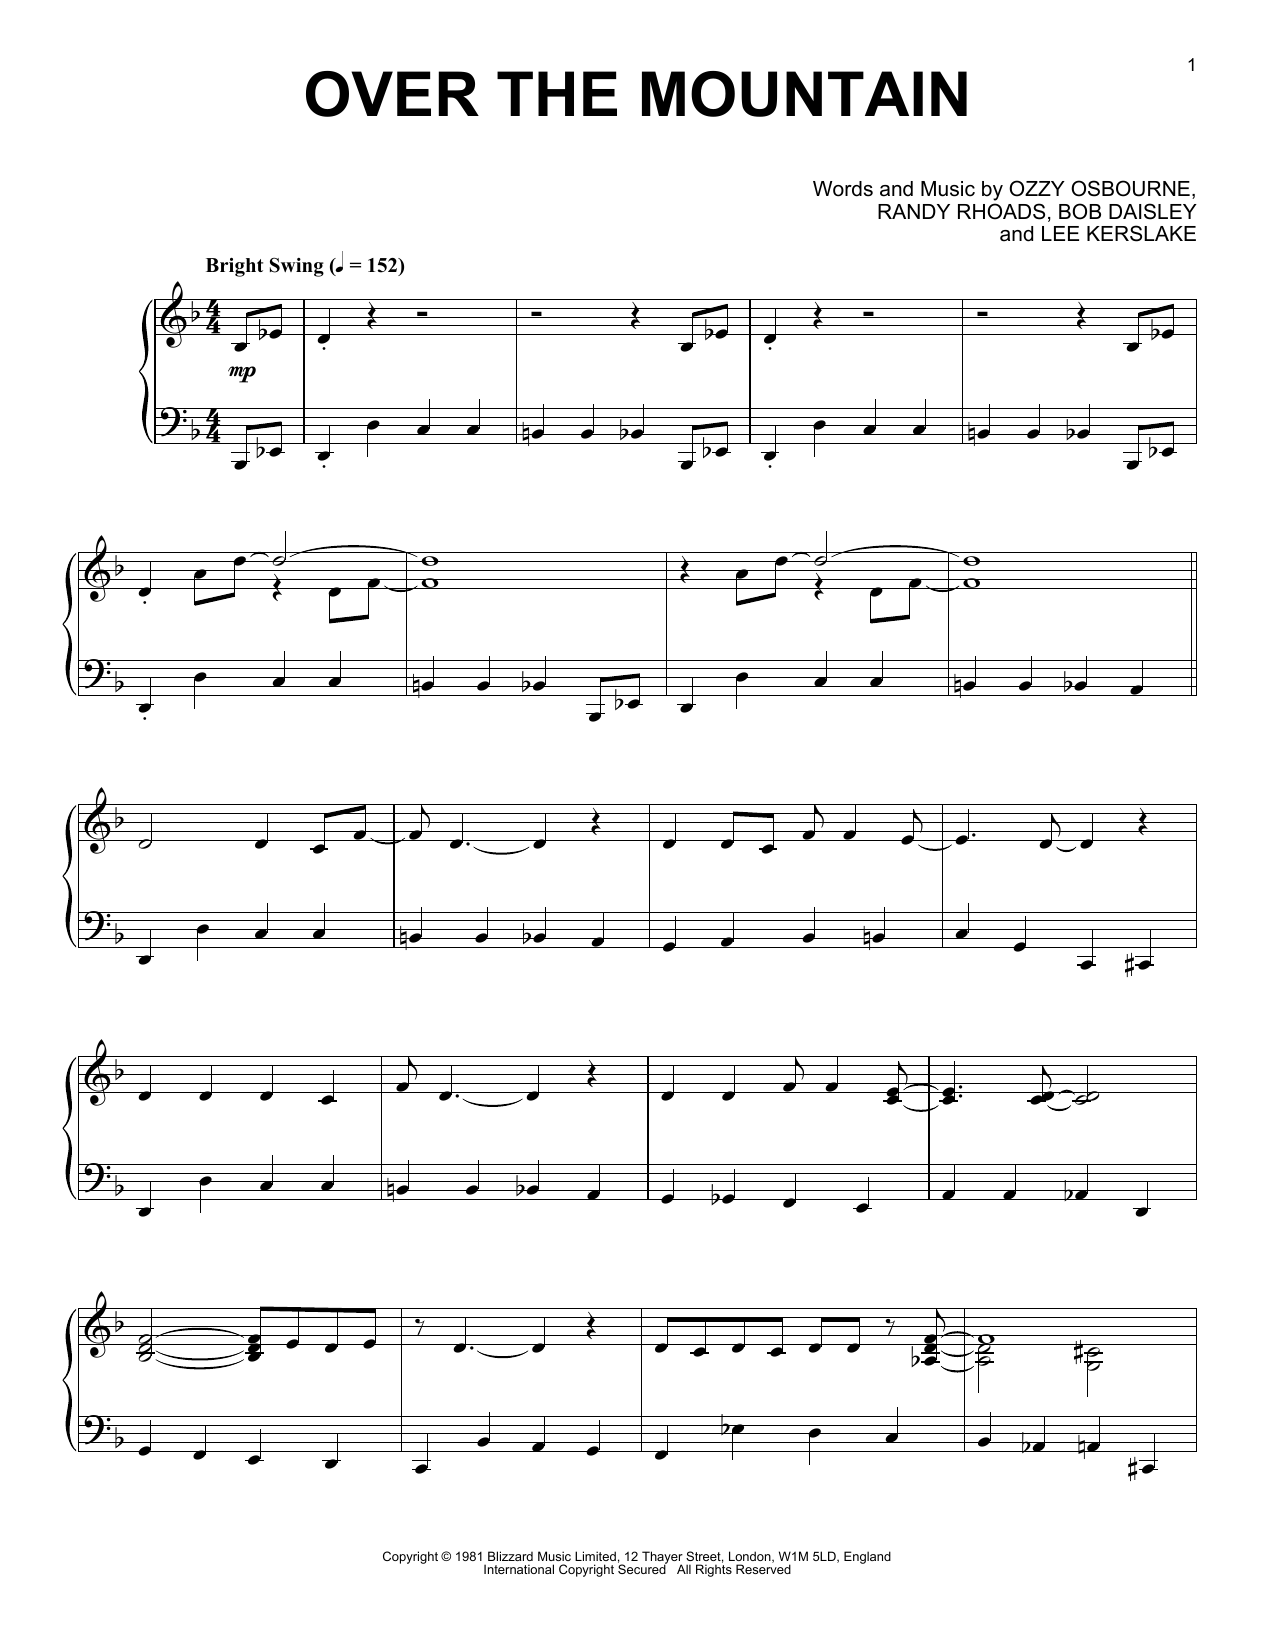 Download Ozzy Osbourne Over The Mountain [Jazz version] Sheet Music